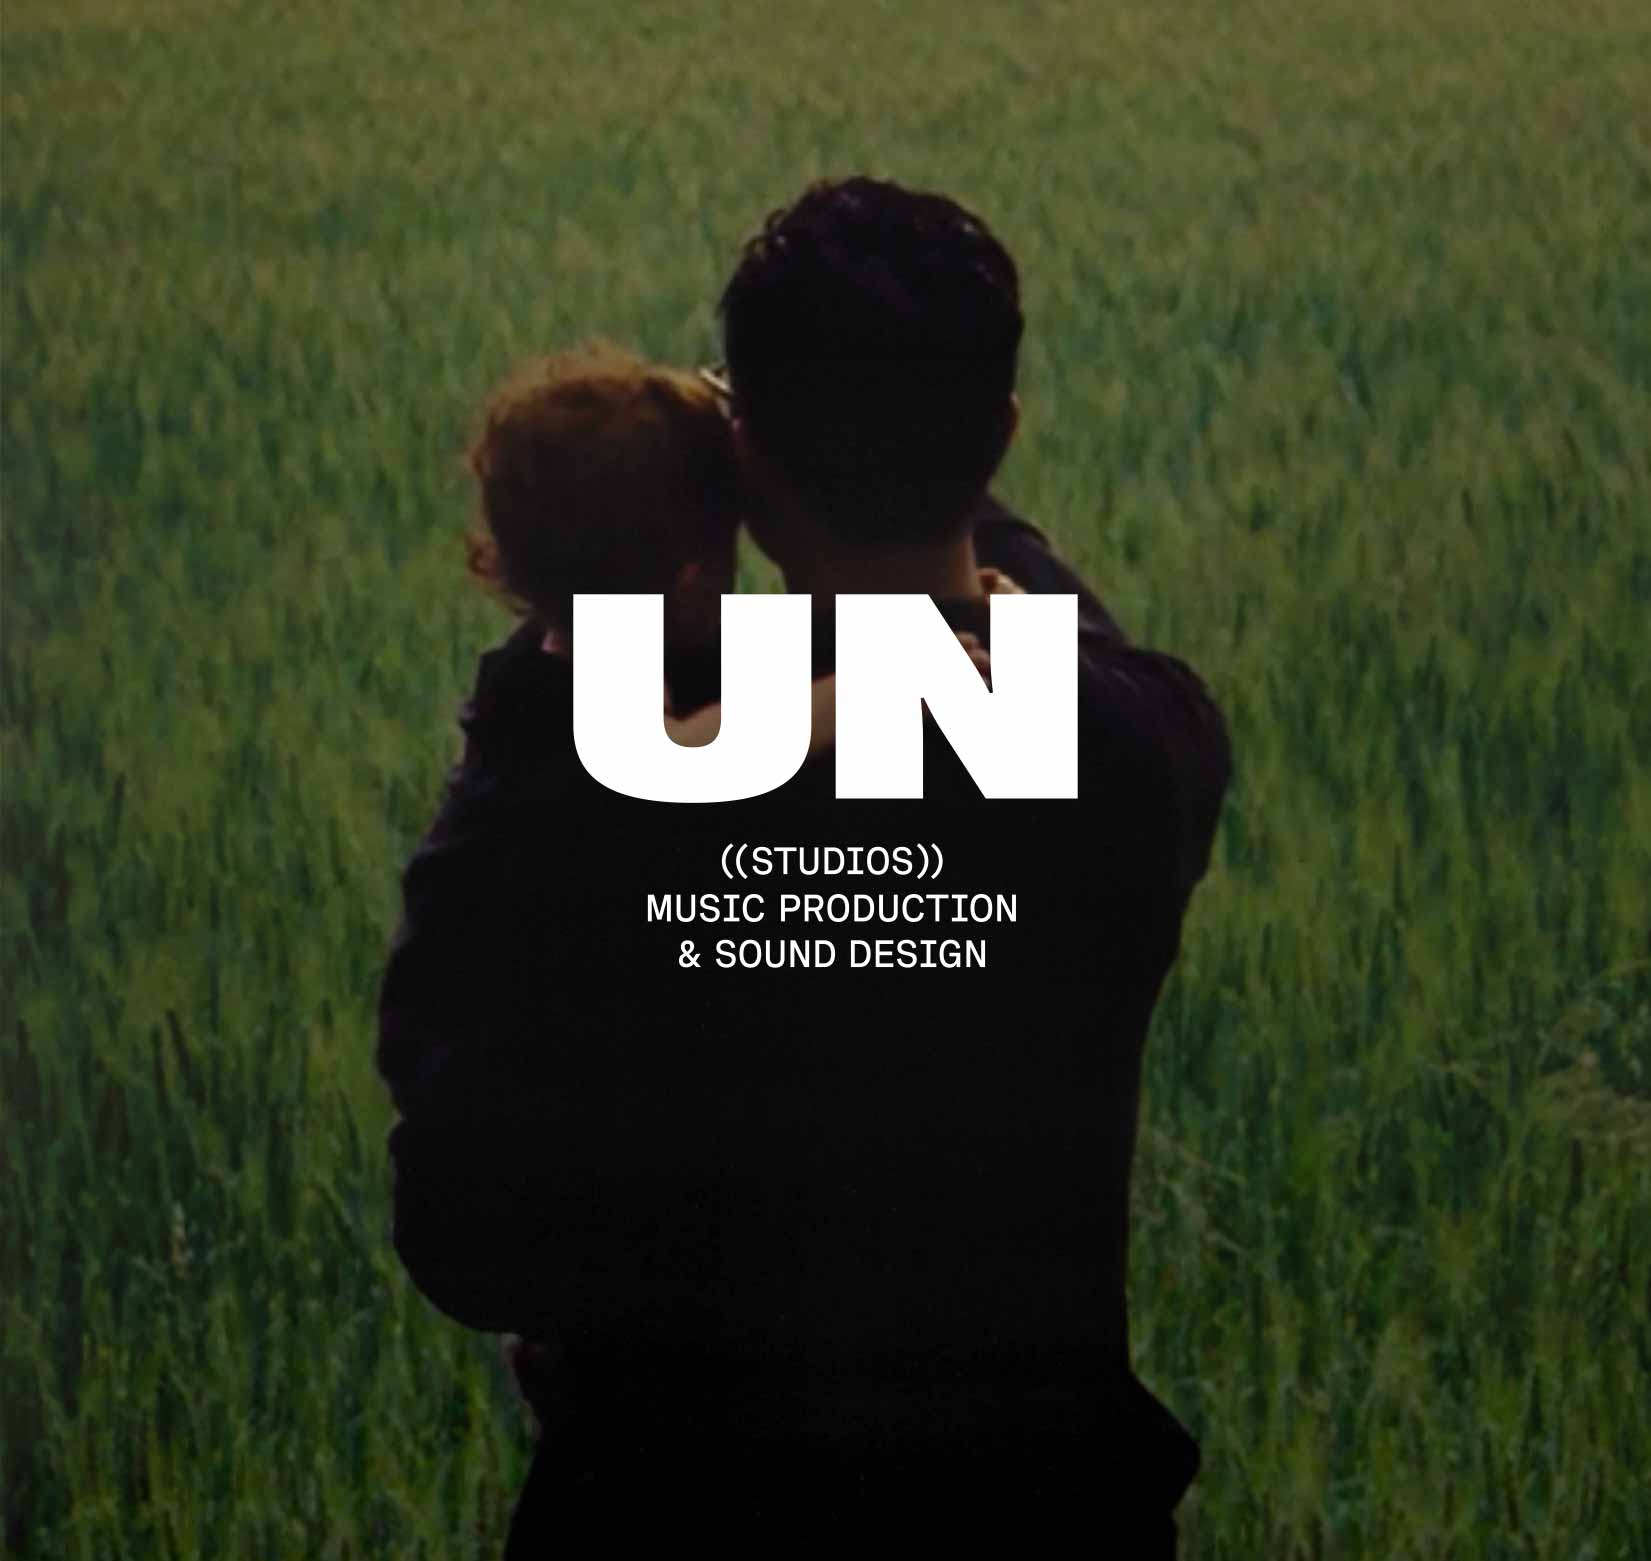 The image shows a man from the back holding a small child and pointing towards a field of grass with the unstudios logo in white over it.